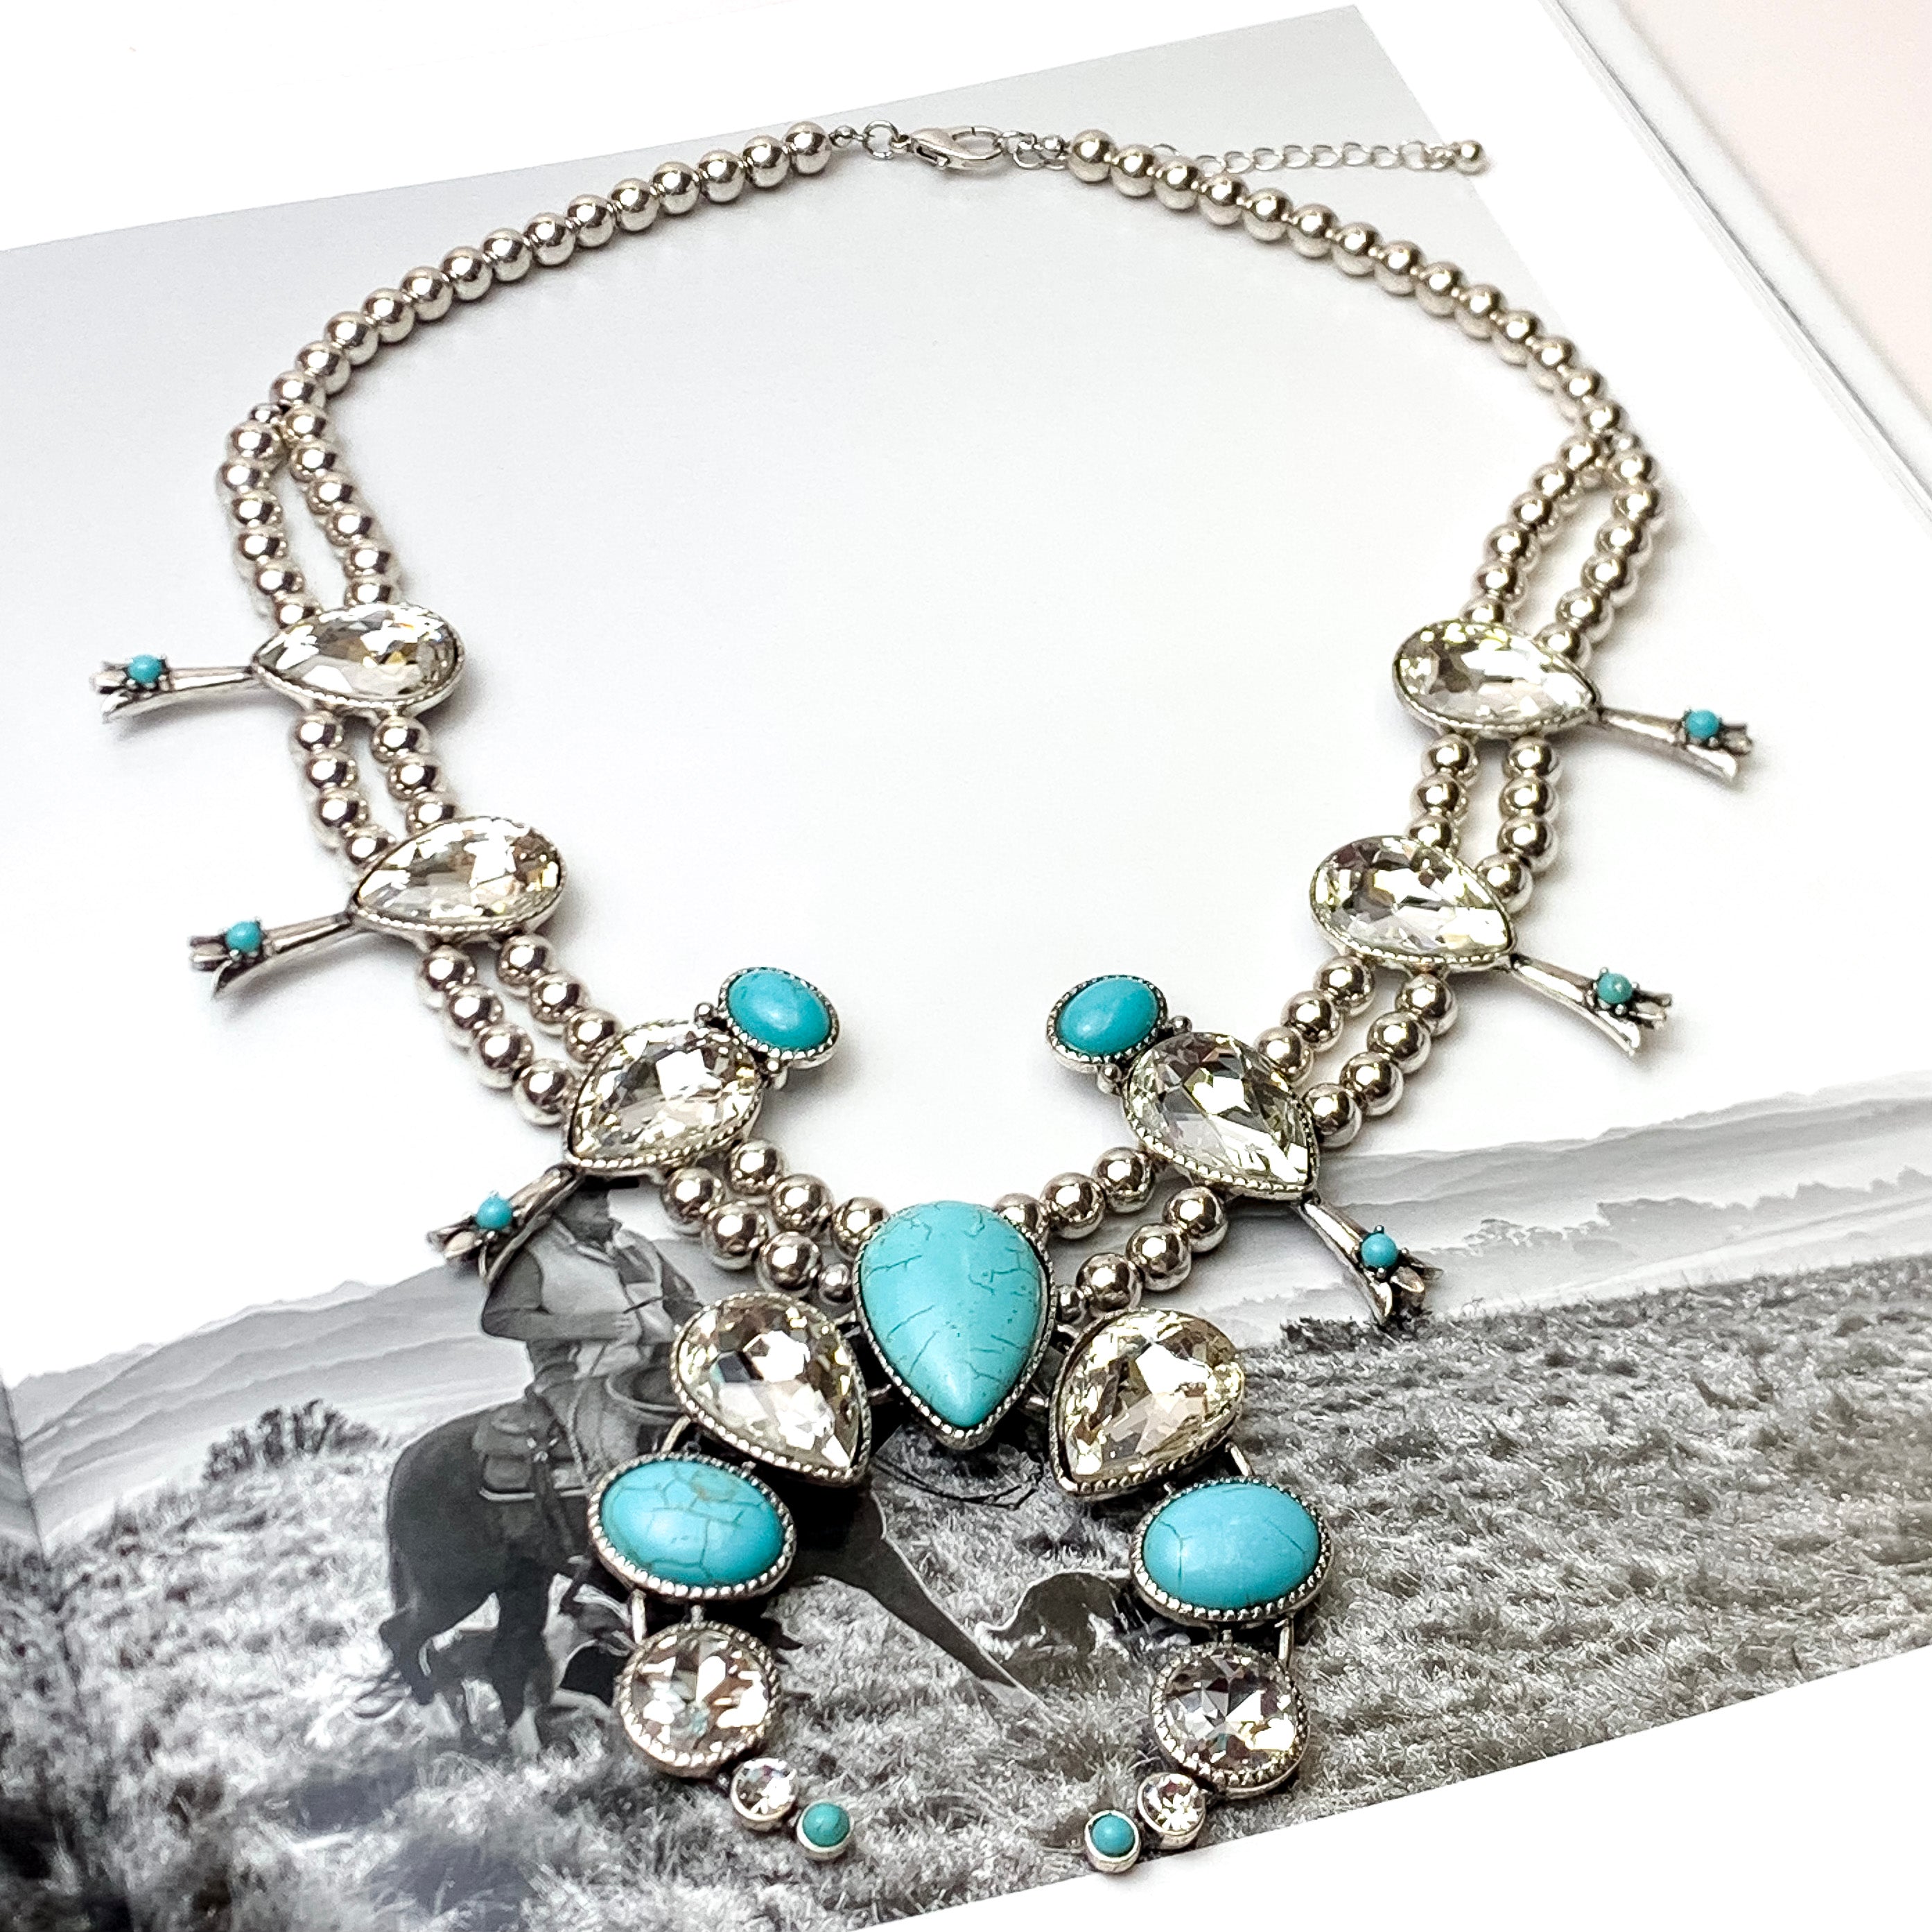 Double Strand Beaded Squash Blossom Necklace and Naja Pendant with Faux Turquoise Stones and Clear Crystals - Giddy Up Glamour Boutique